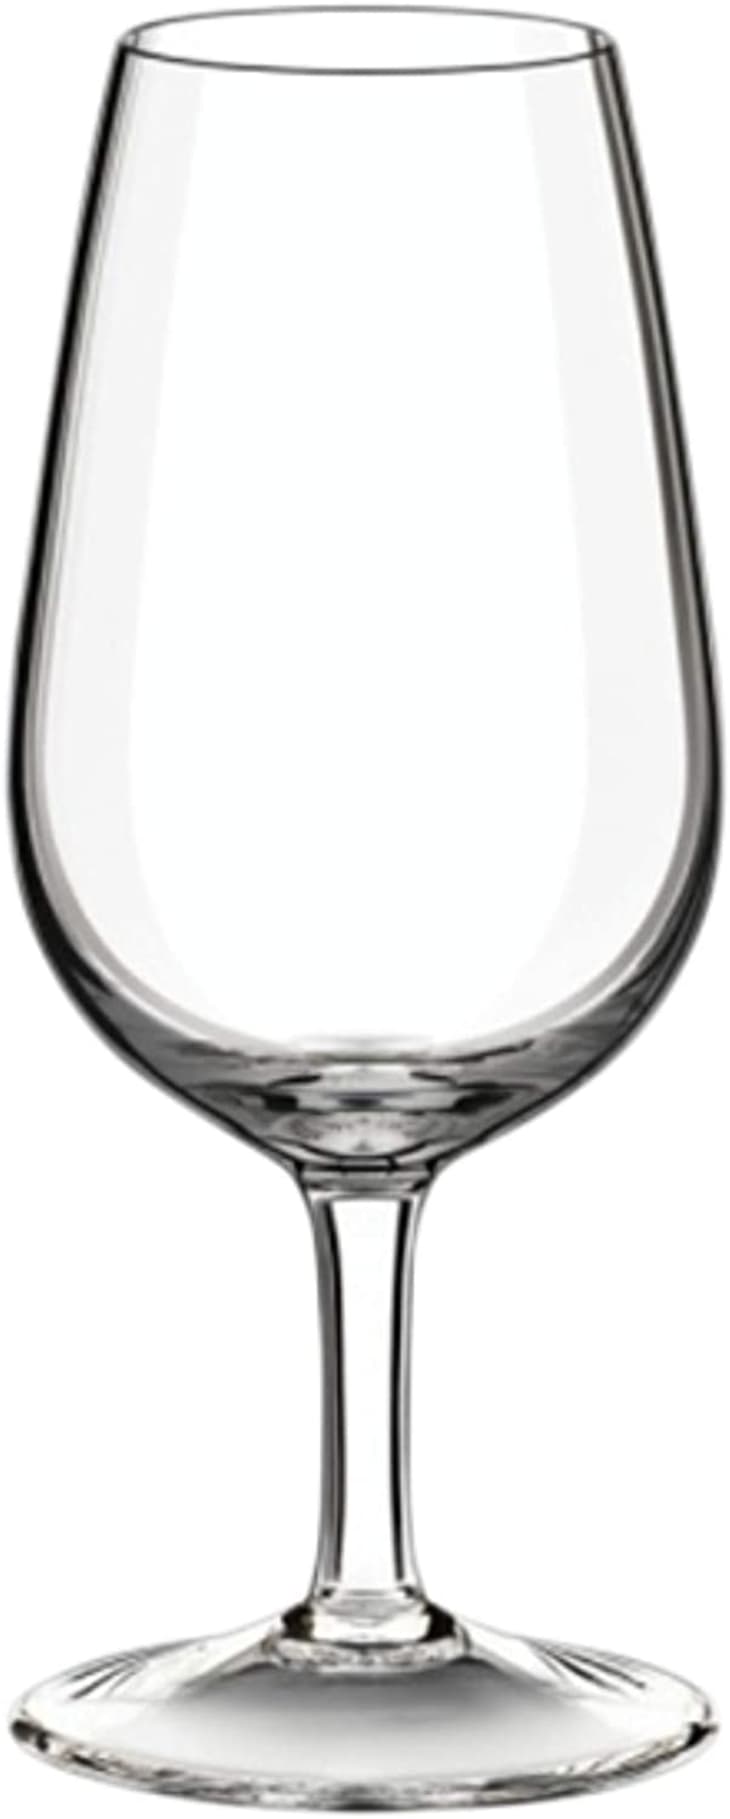 Product Image: RONA INAO/ISO Tasting Glasses